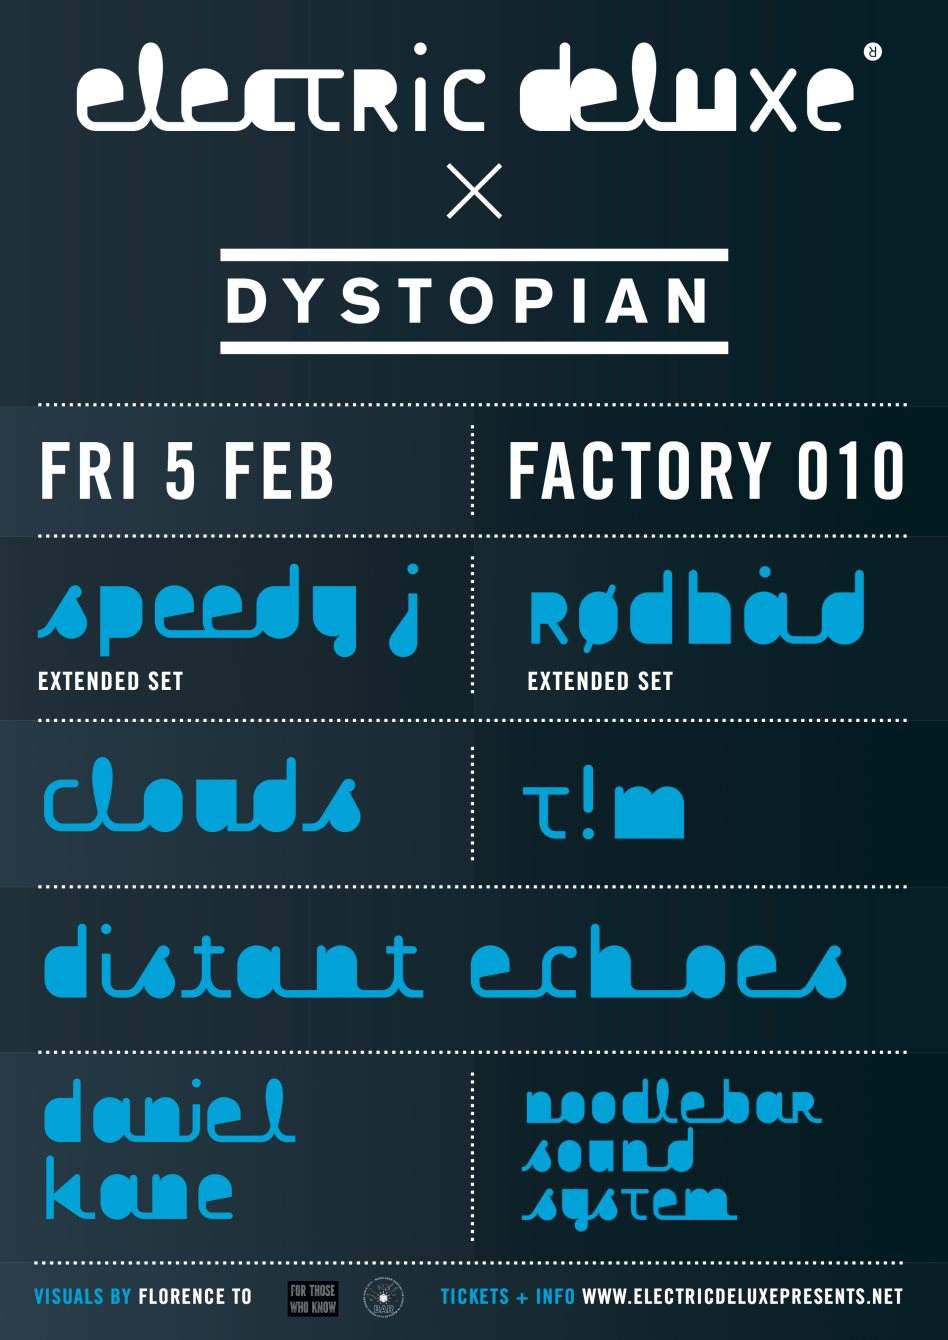 Electric Deluxe X Dystopian Speedy J, Rødhåd, Clouds,This Friday - Página trasera